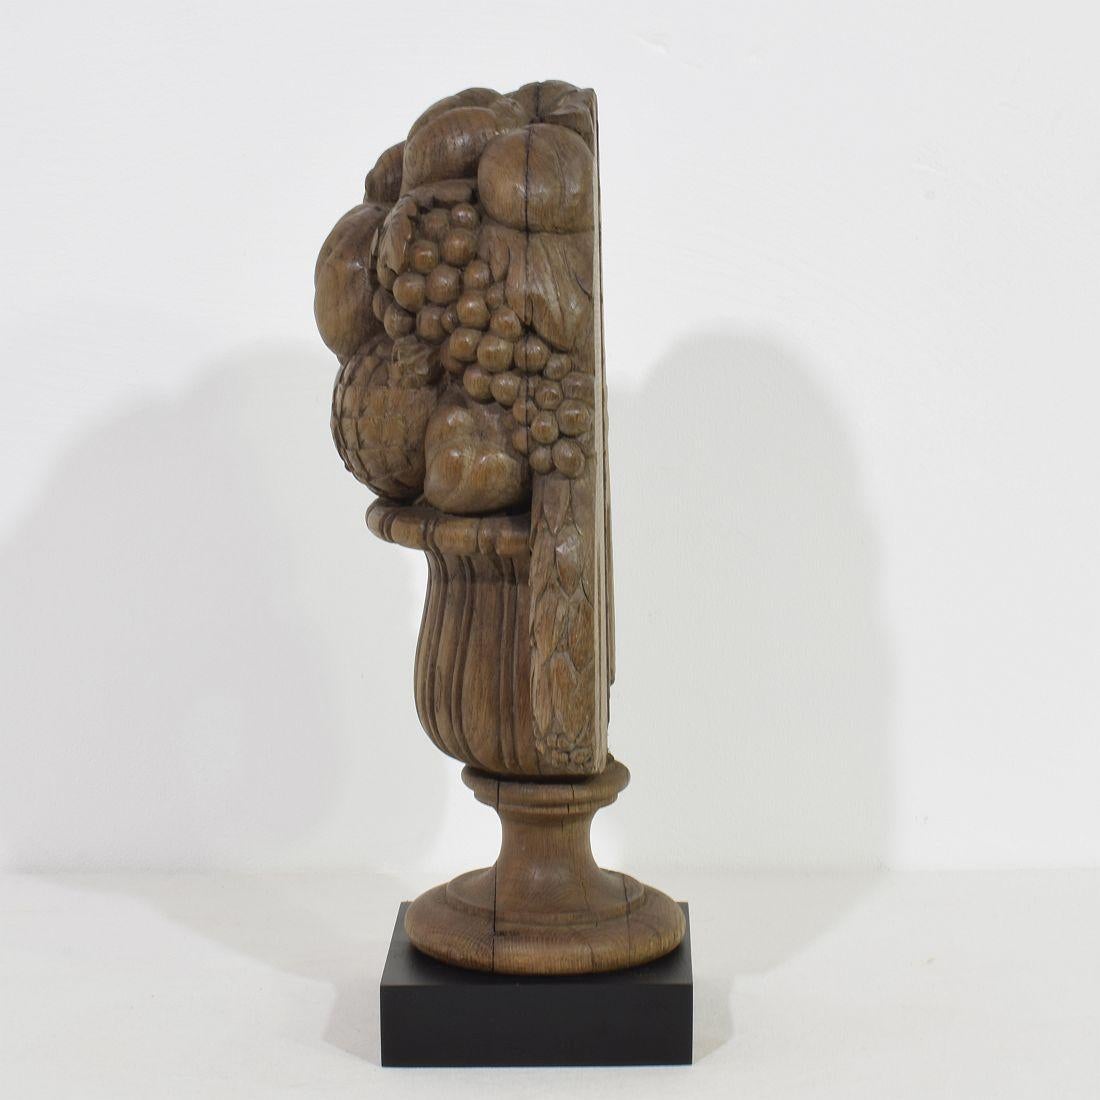 French Early 19th Century Neoclassical Hand Carved Oak Vase Ornament/ Finial For Sale 2